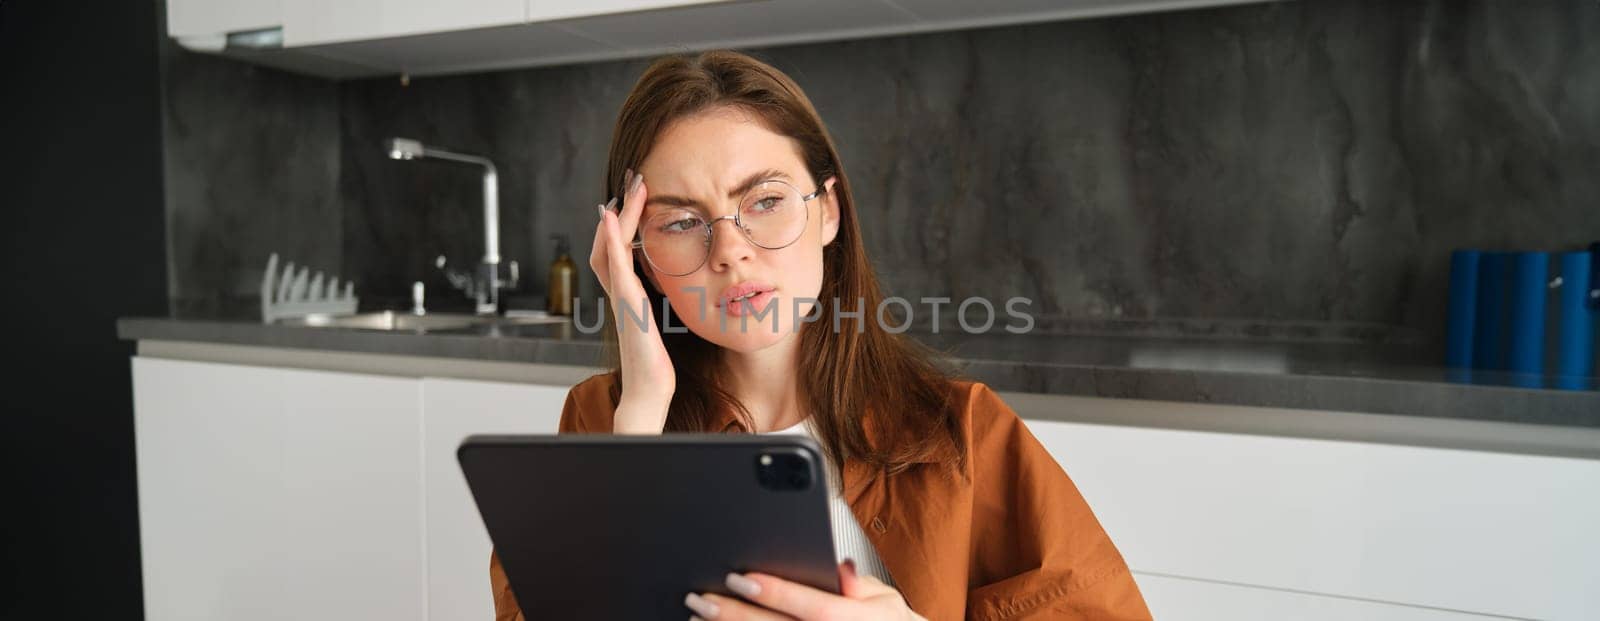 Portrait of woman freelancer, wearing glasses, holding digital tablet, looking tired, has migraine or headache, reading e-book. Freelance worker sits at home with gadget.